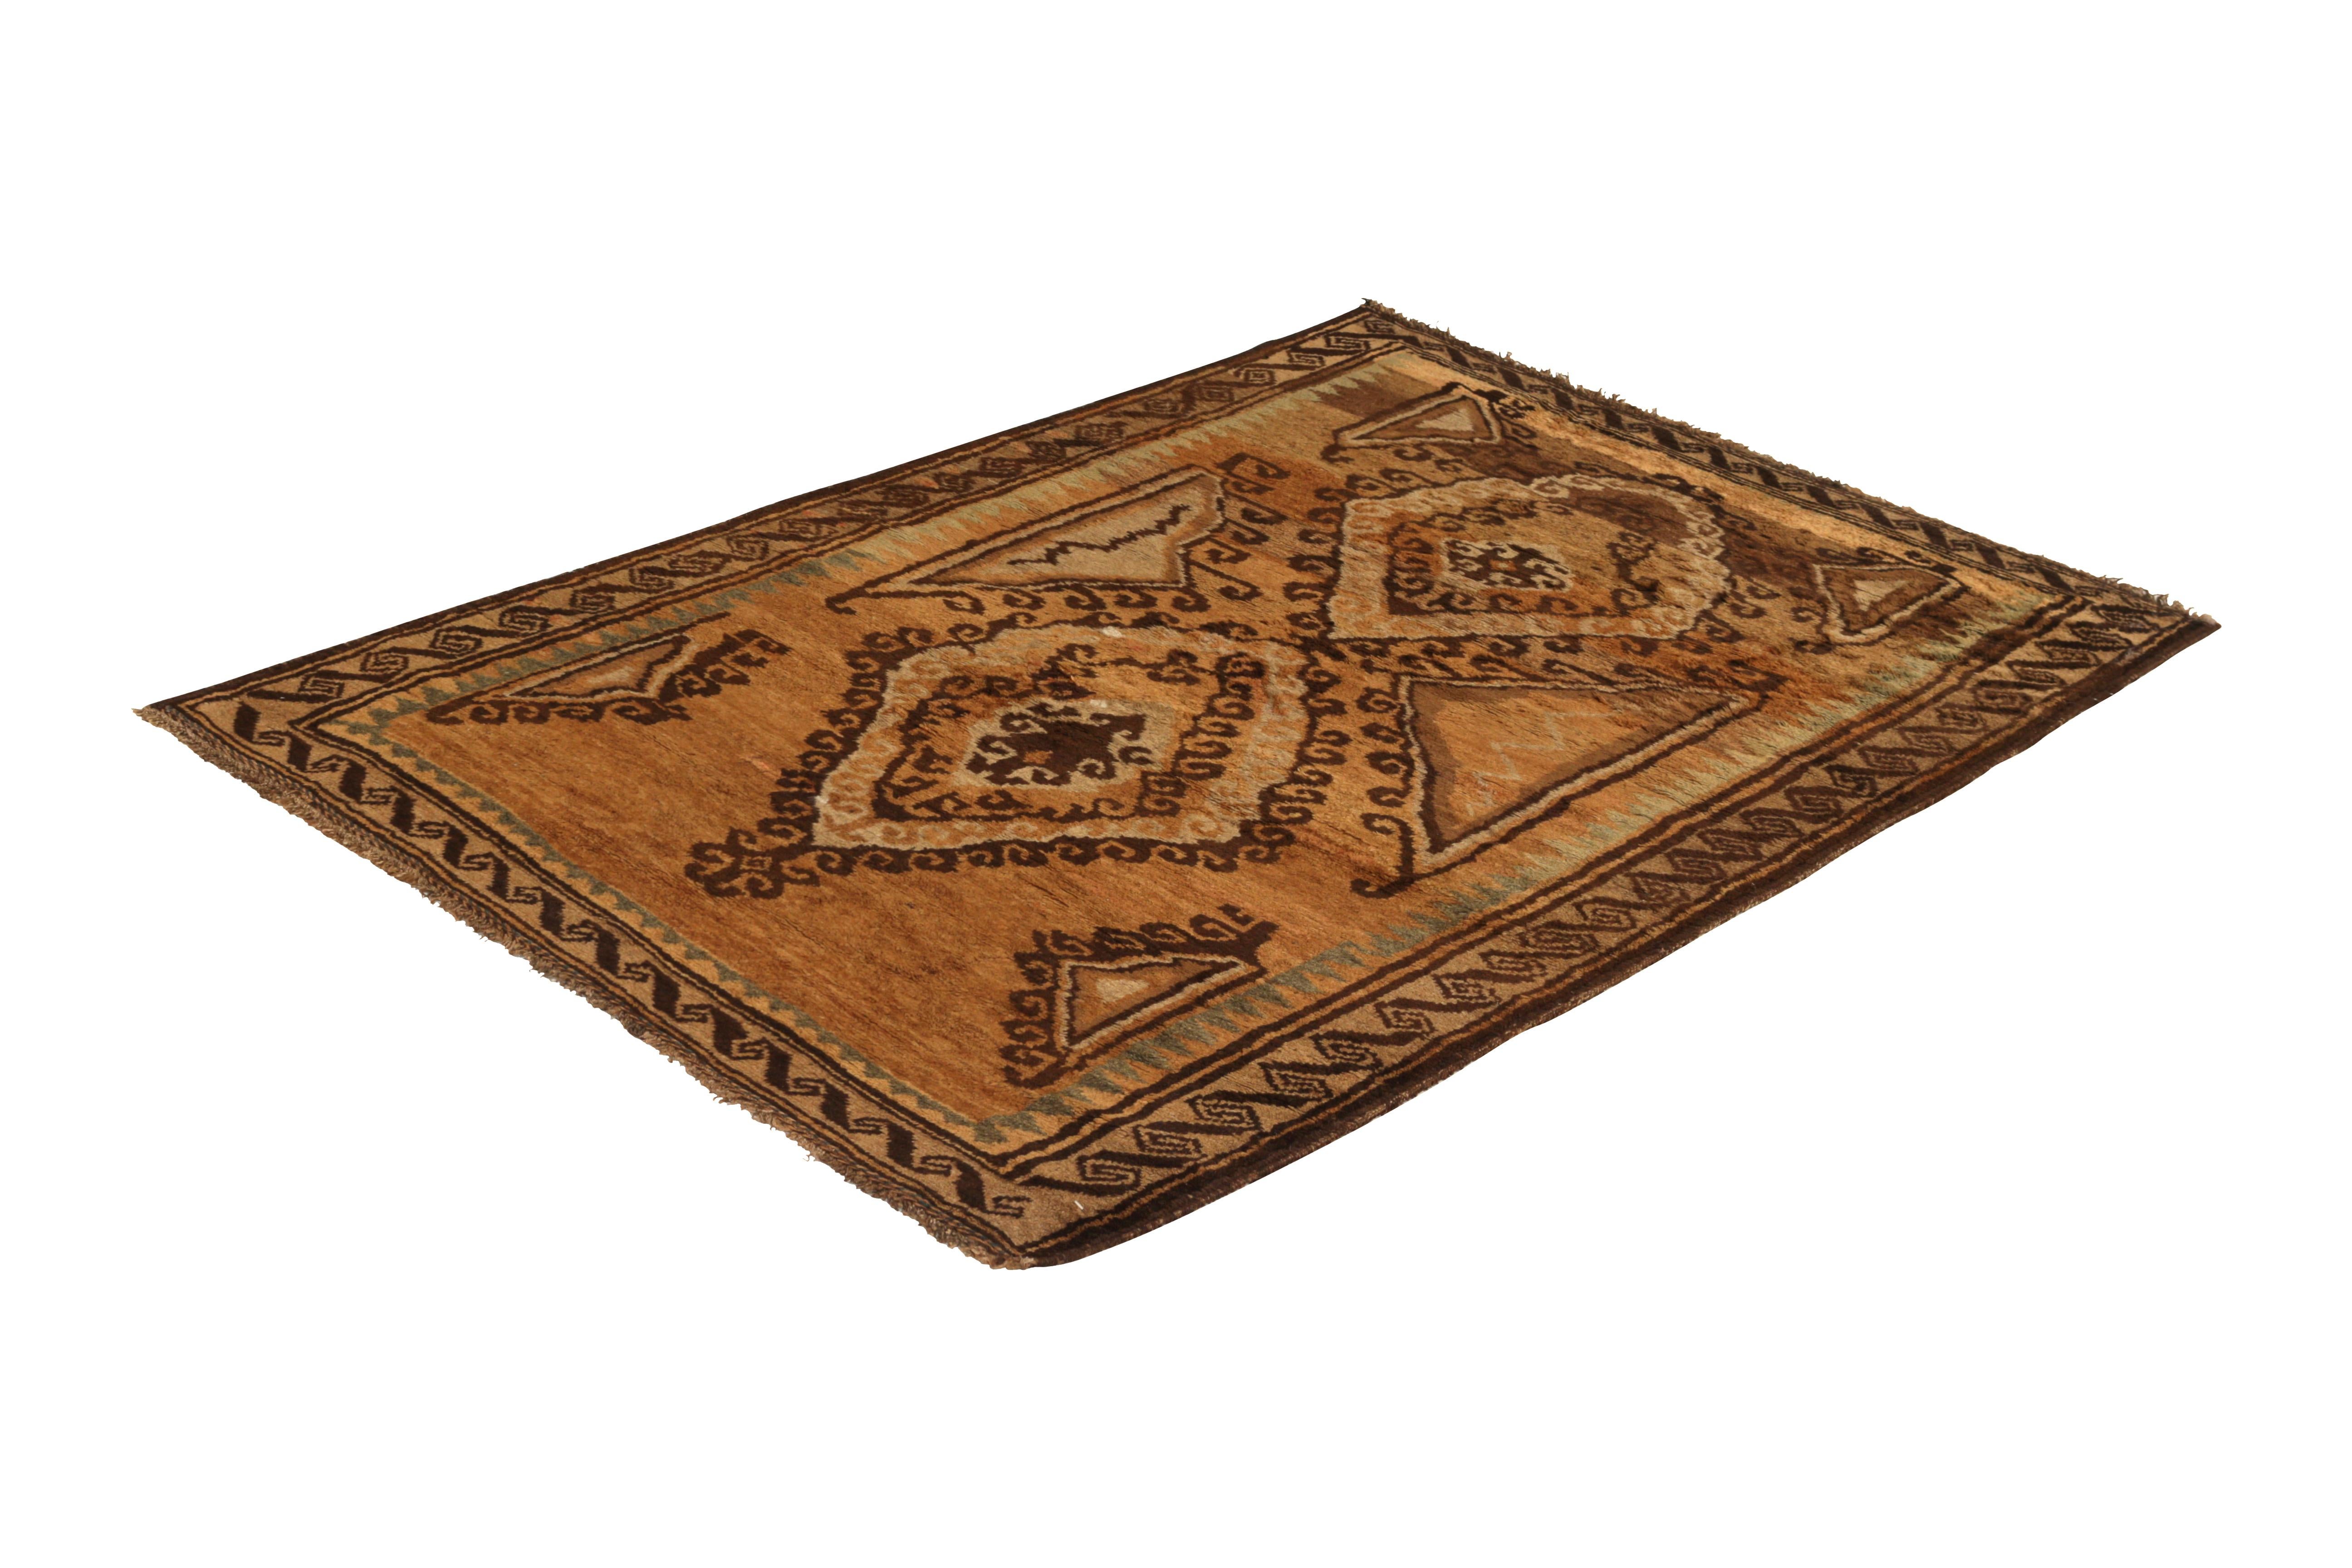 Hand knotted in wool originating from Persia circa 1950-1960, this vintage rug connotes a midcentury Baluch tribal rug design, marrying the Classic richness of beige-brown hues with the equally celebrated tribal medallion patterns in the central